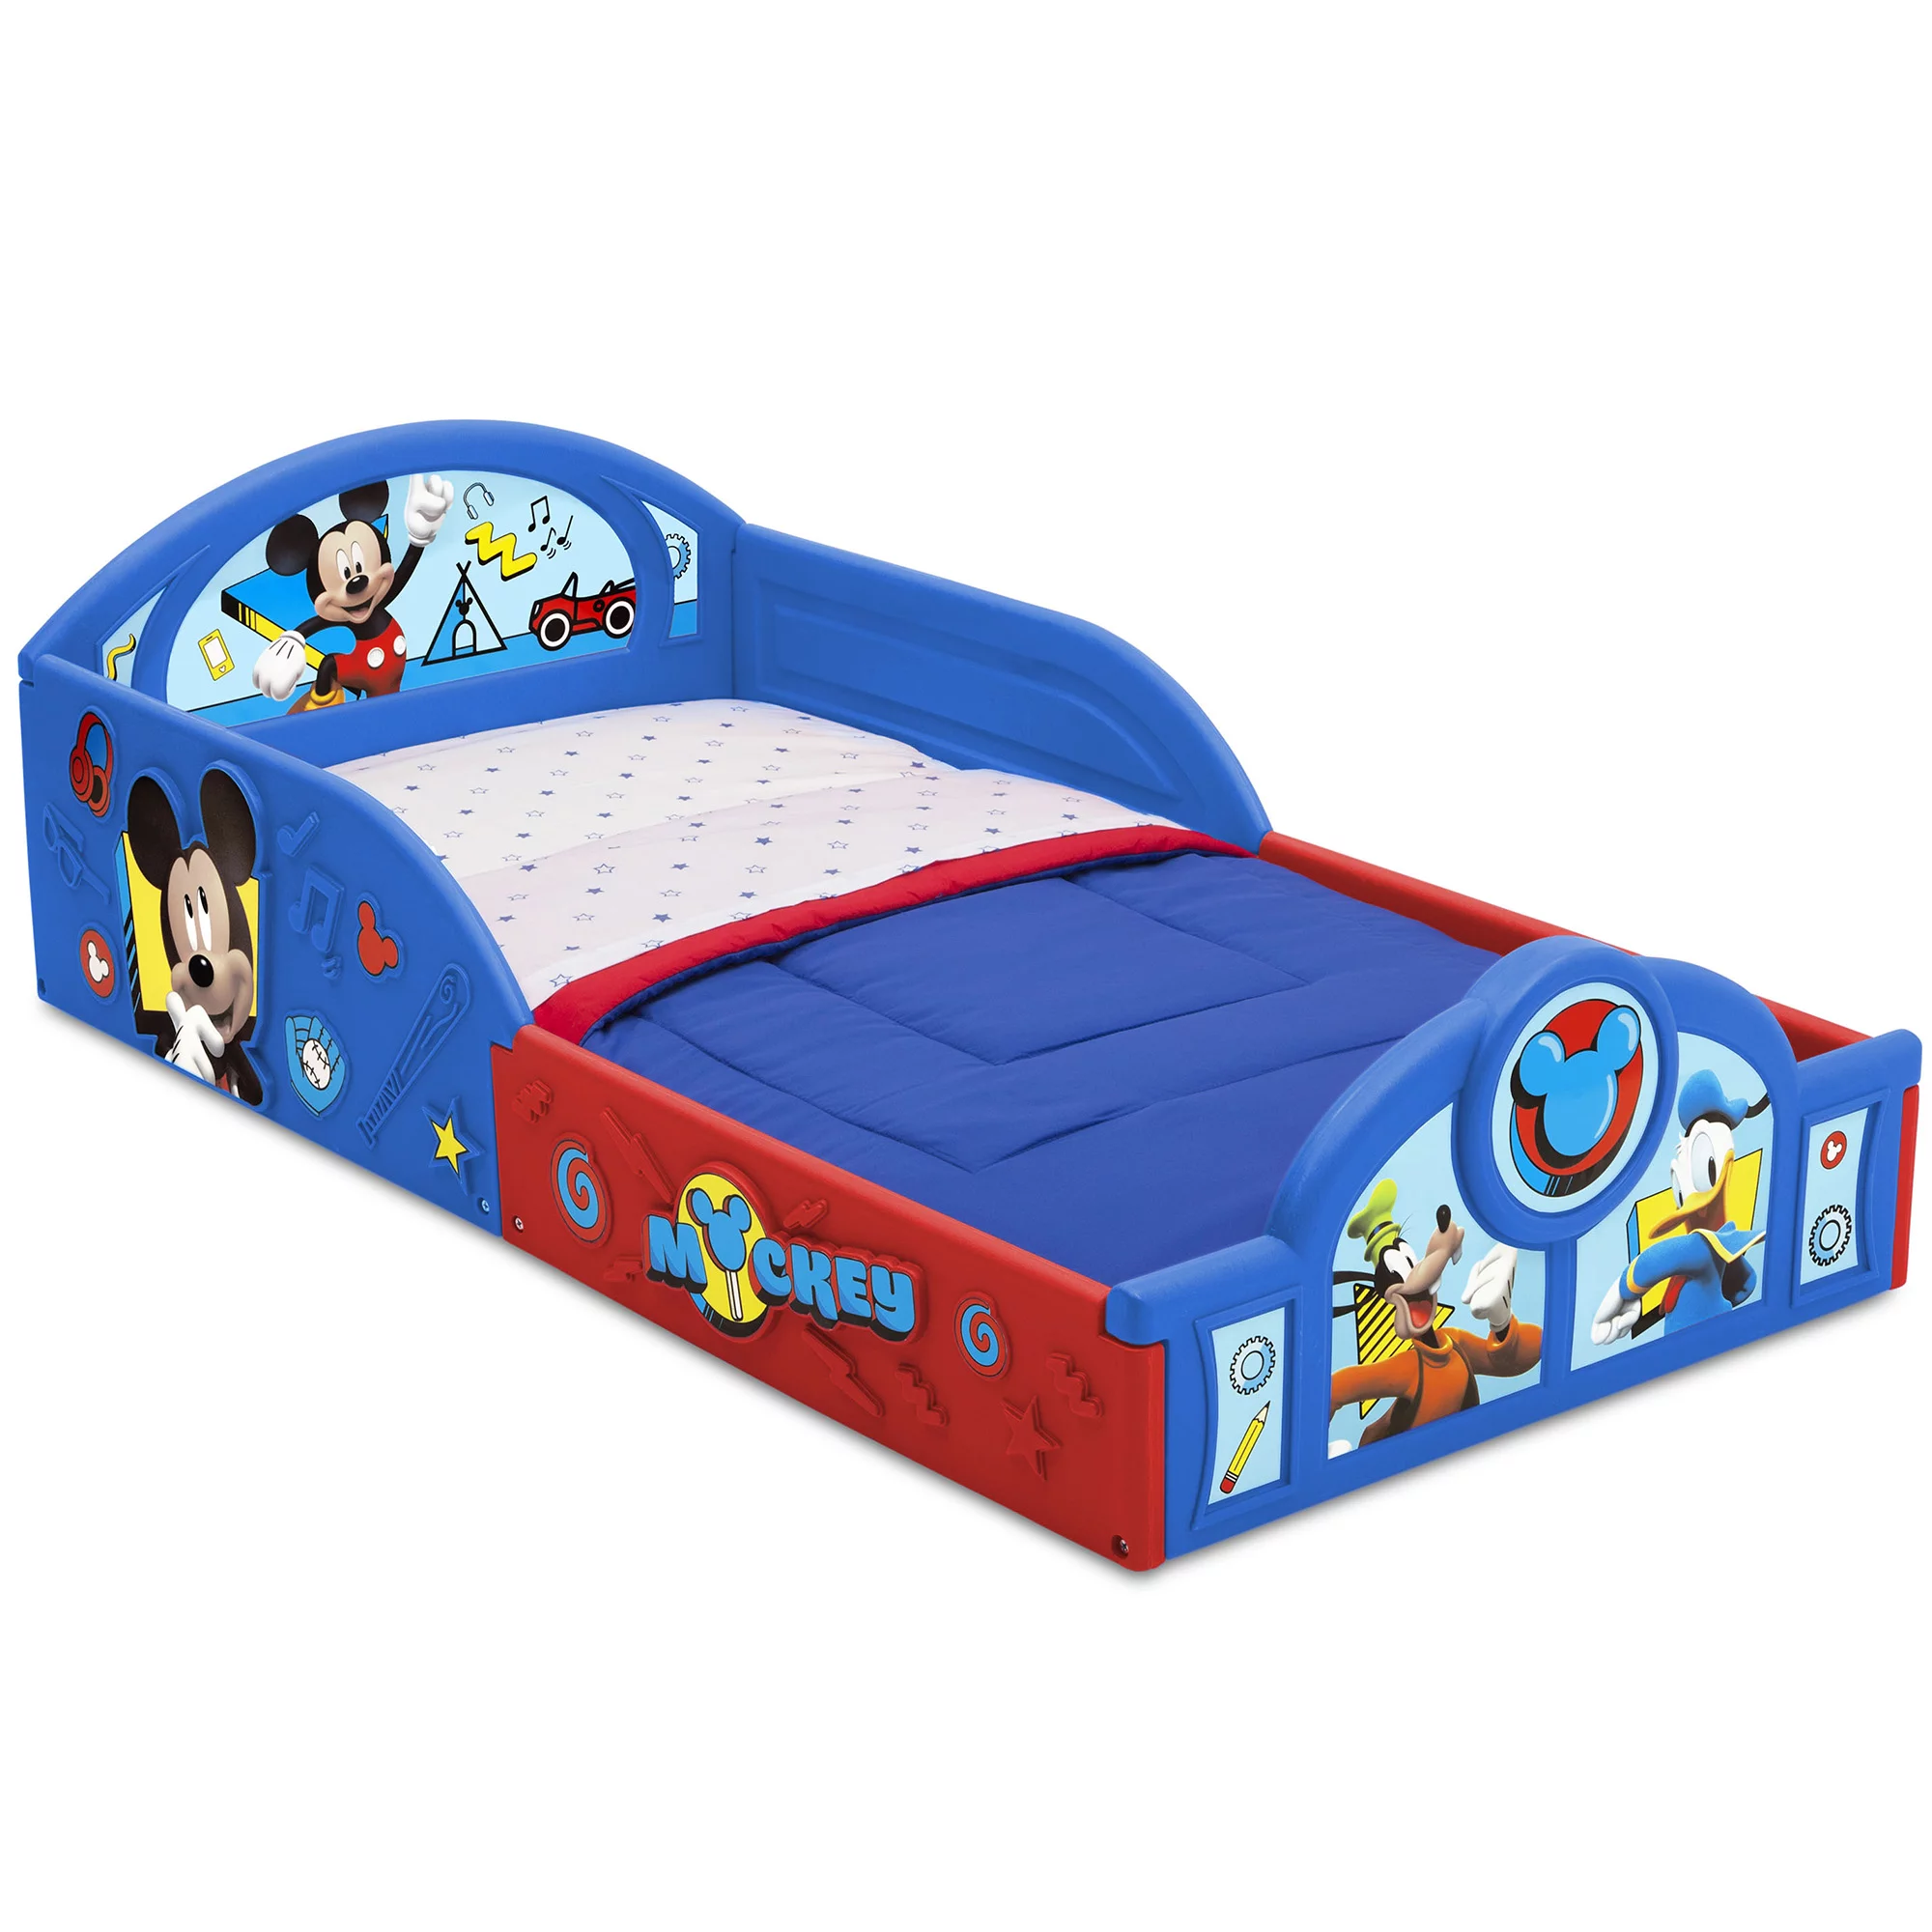 Disney-Mickey-Mouse-Toddler-Bed